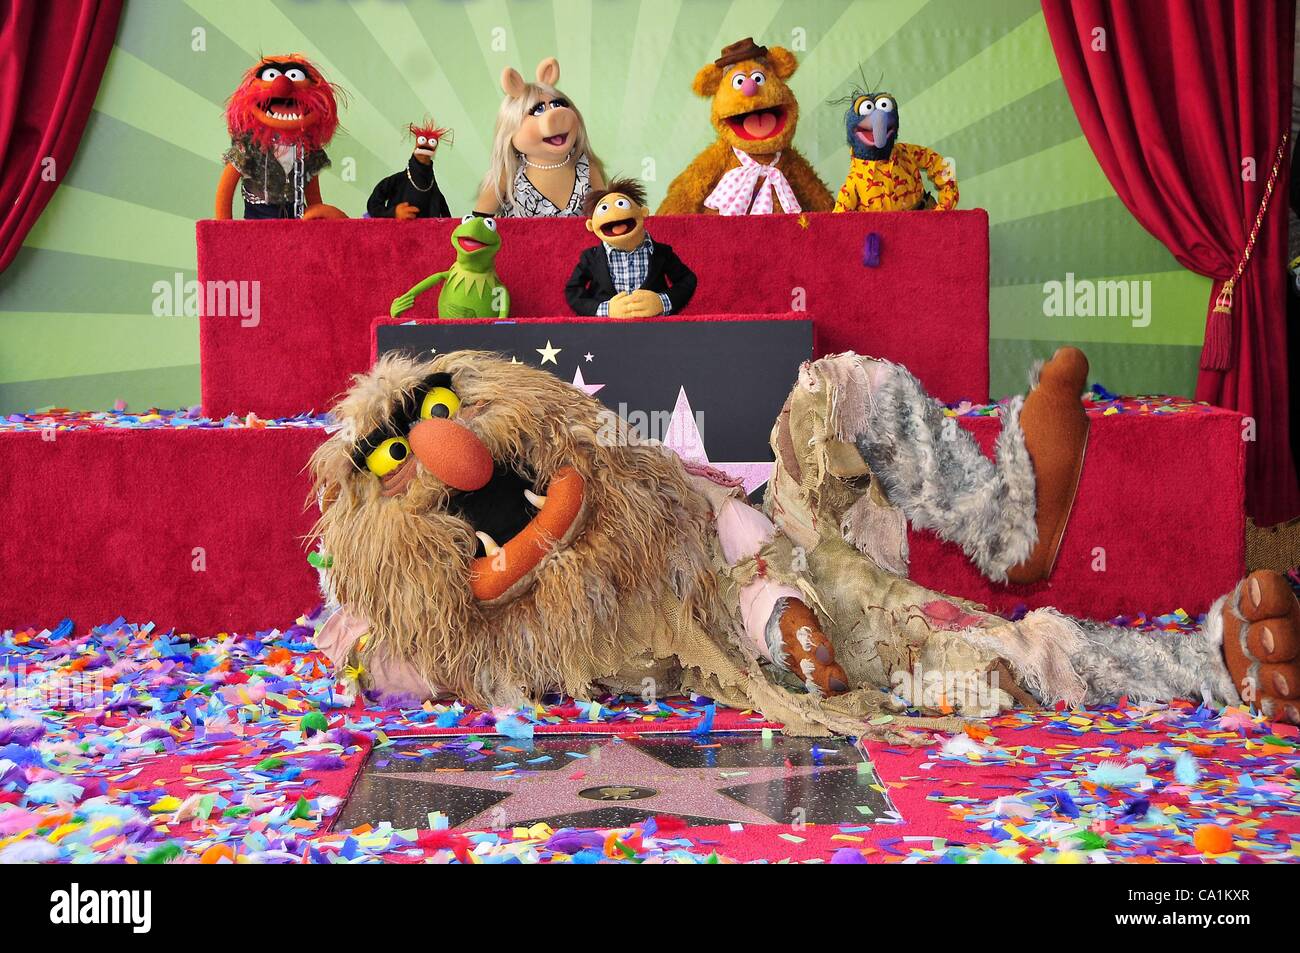 Animal, Pepe, Kermit, Sweetums, Miss Piggy, Walter, Fozzie, Gonzo at the induction ceremony for Star on the Hollywood Walk of Fame forThe Muppets, Hollywood Boulevard, Los Angeles, CA March 20, 2012. Photo By: Michael Germana/Everett Collection Stock Photo